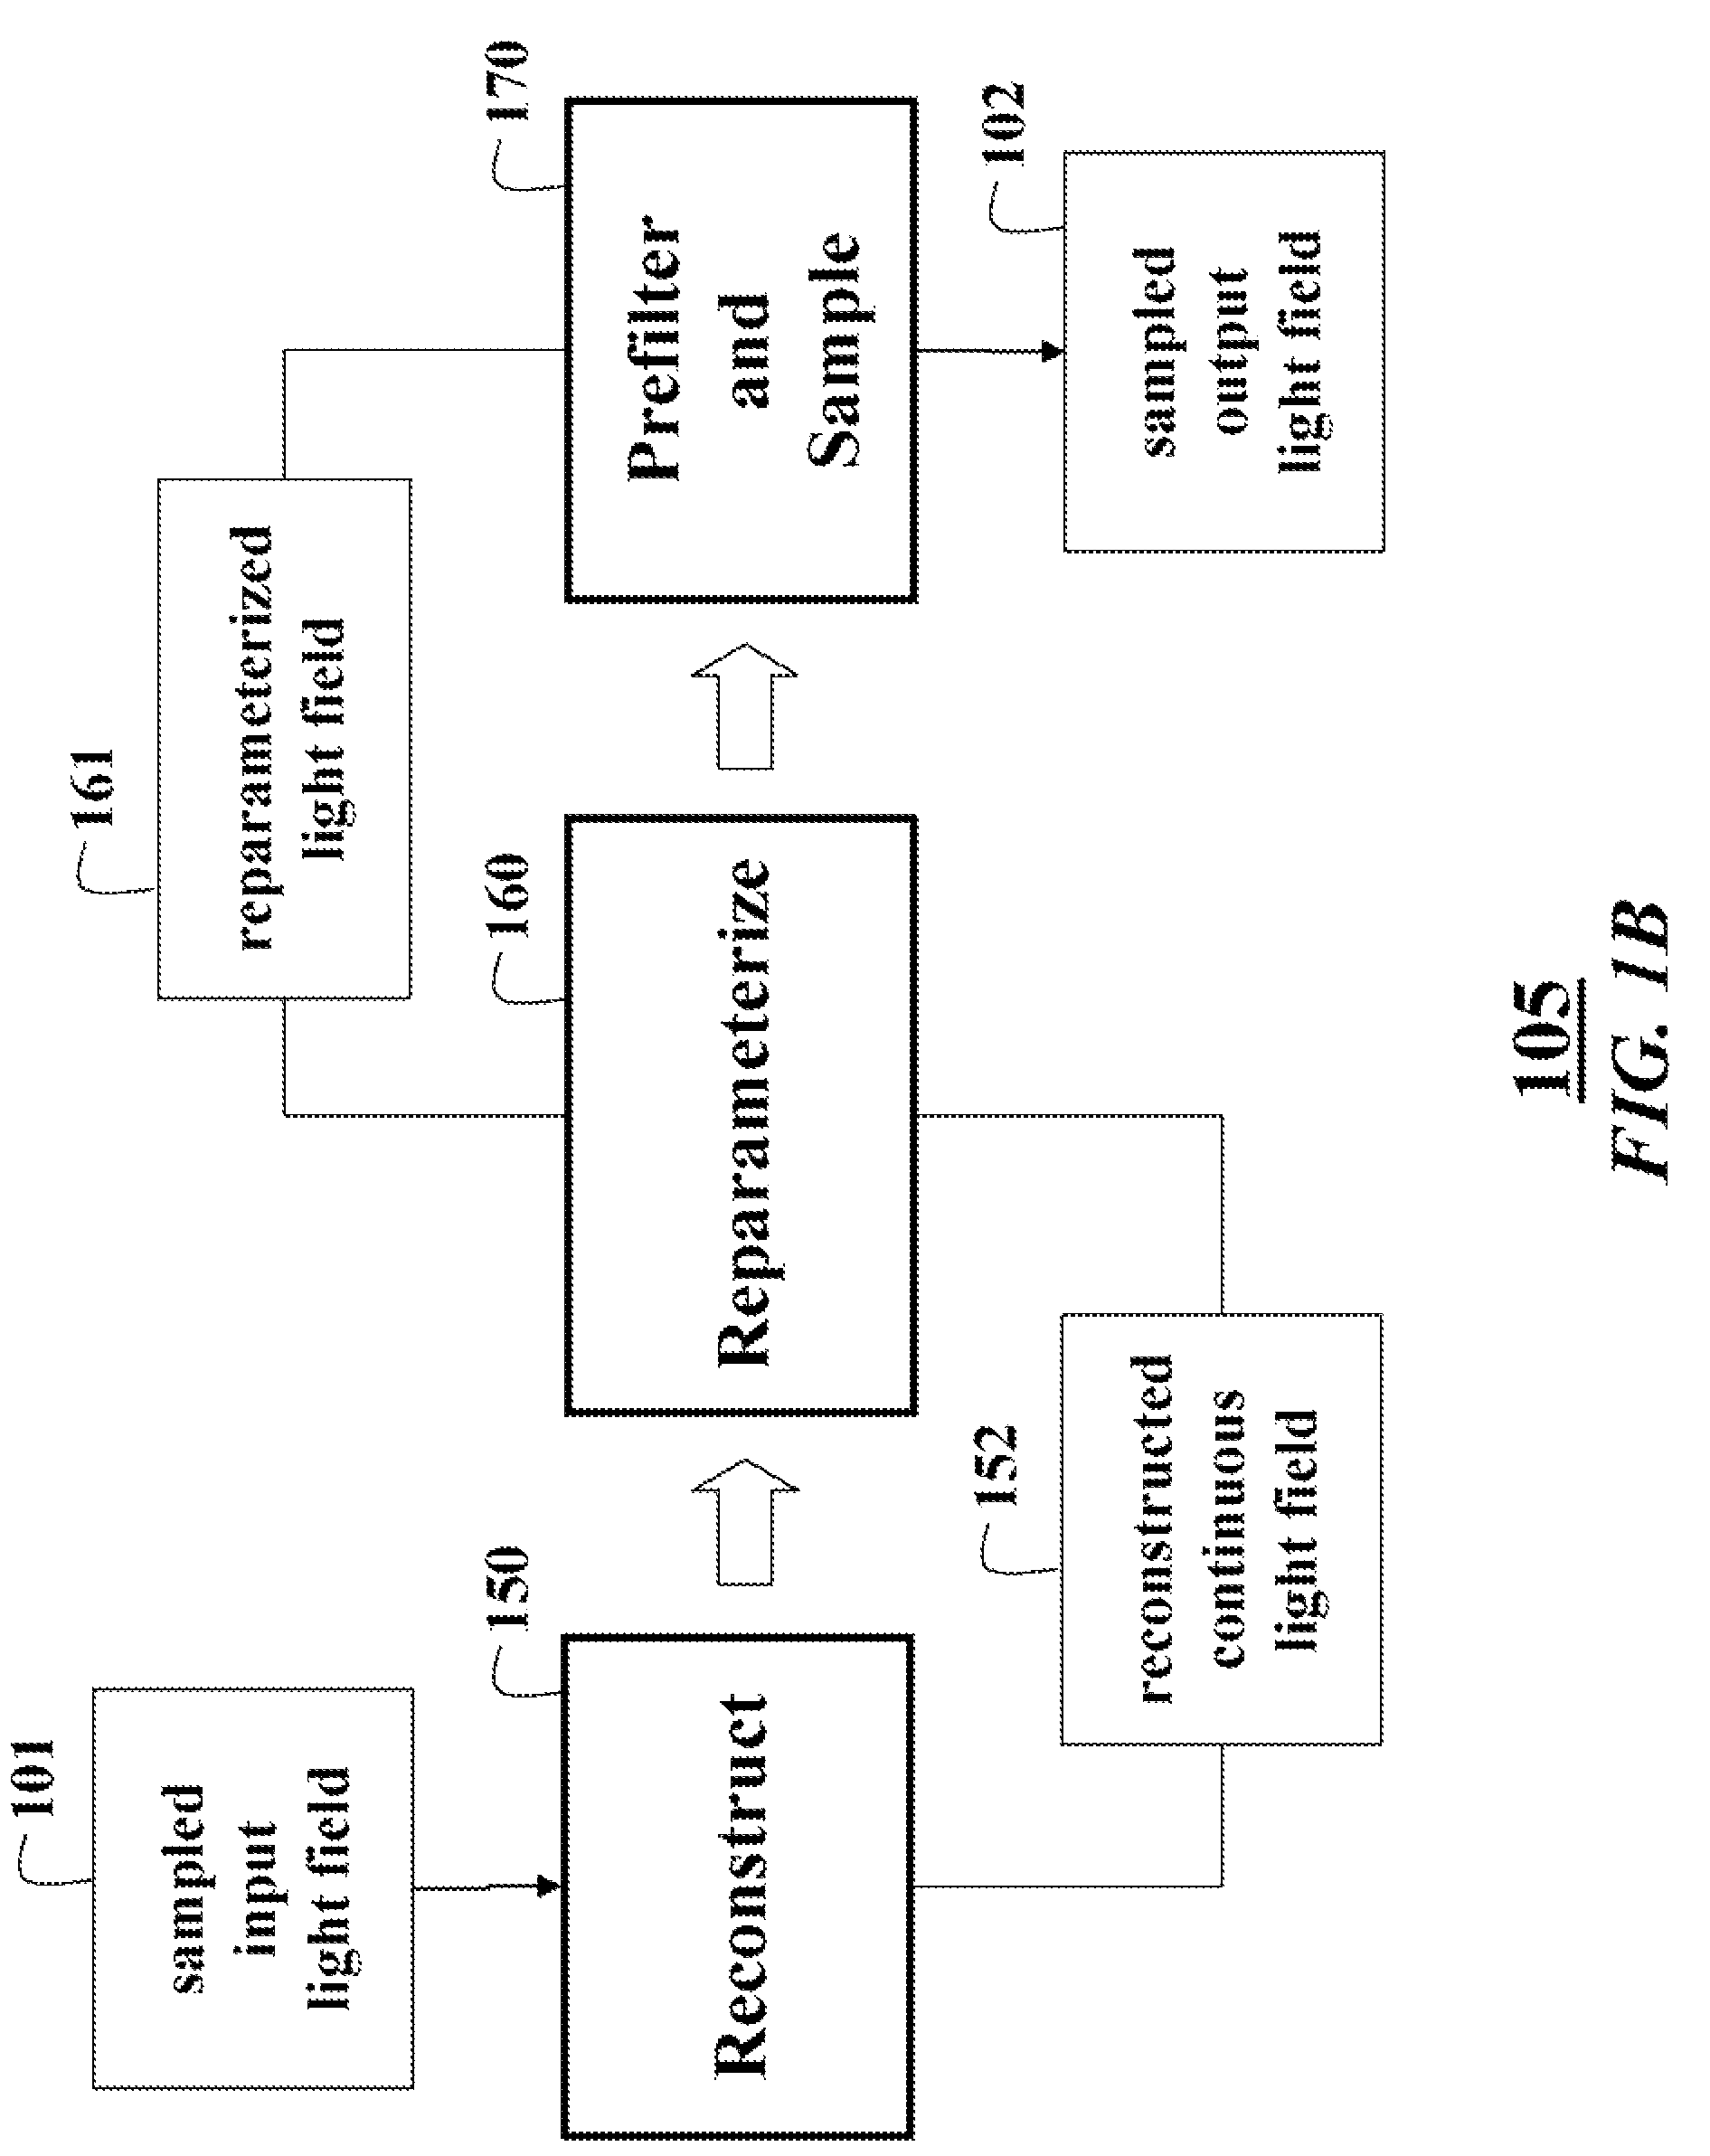 Method and system for decoding and displaying 3D light fields